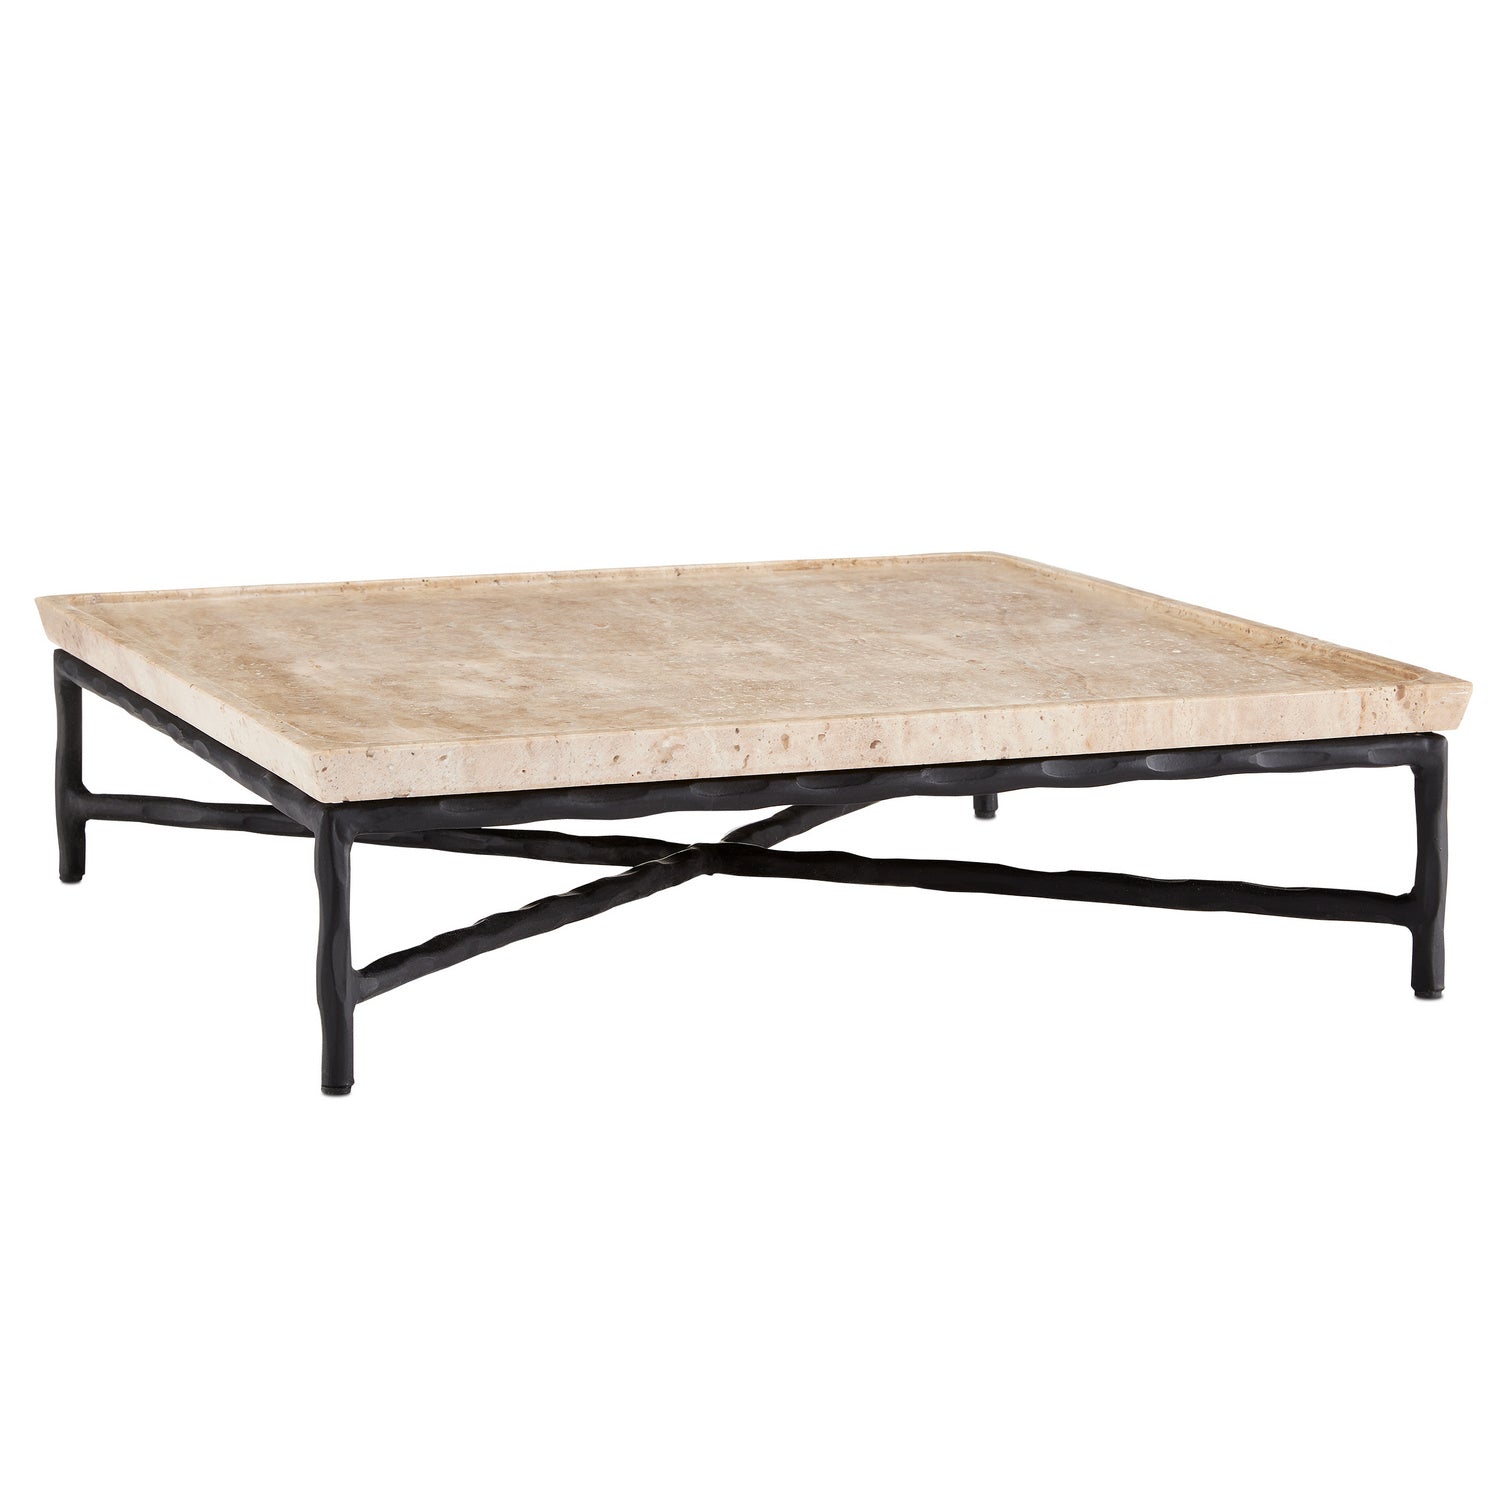 Tray from the Boyles collection in Natural/Black finish